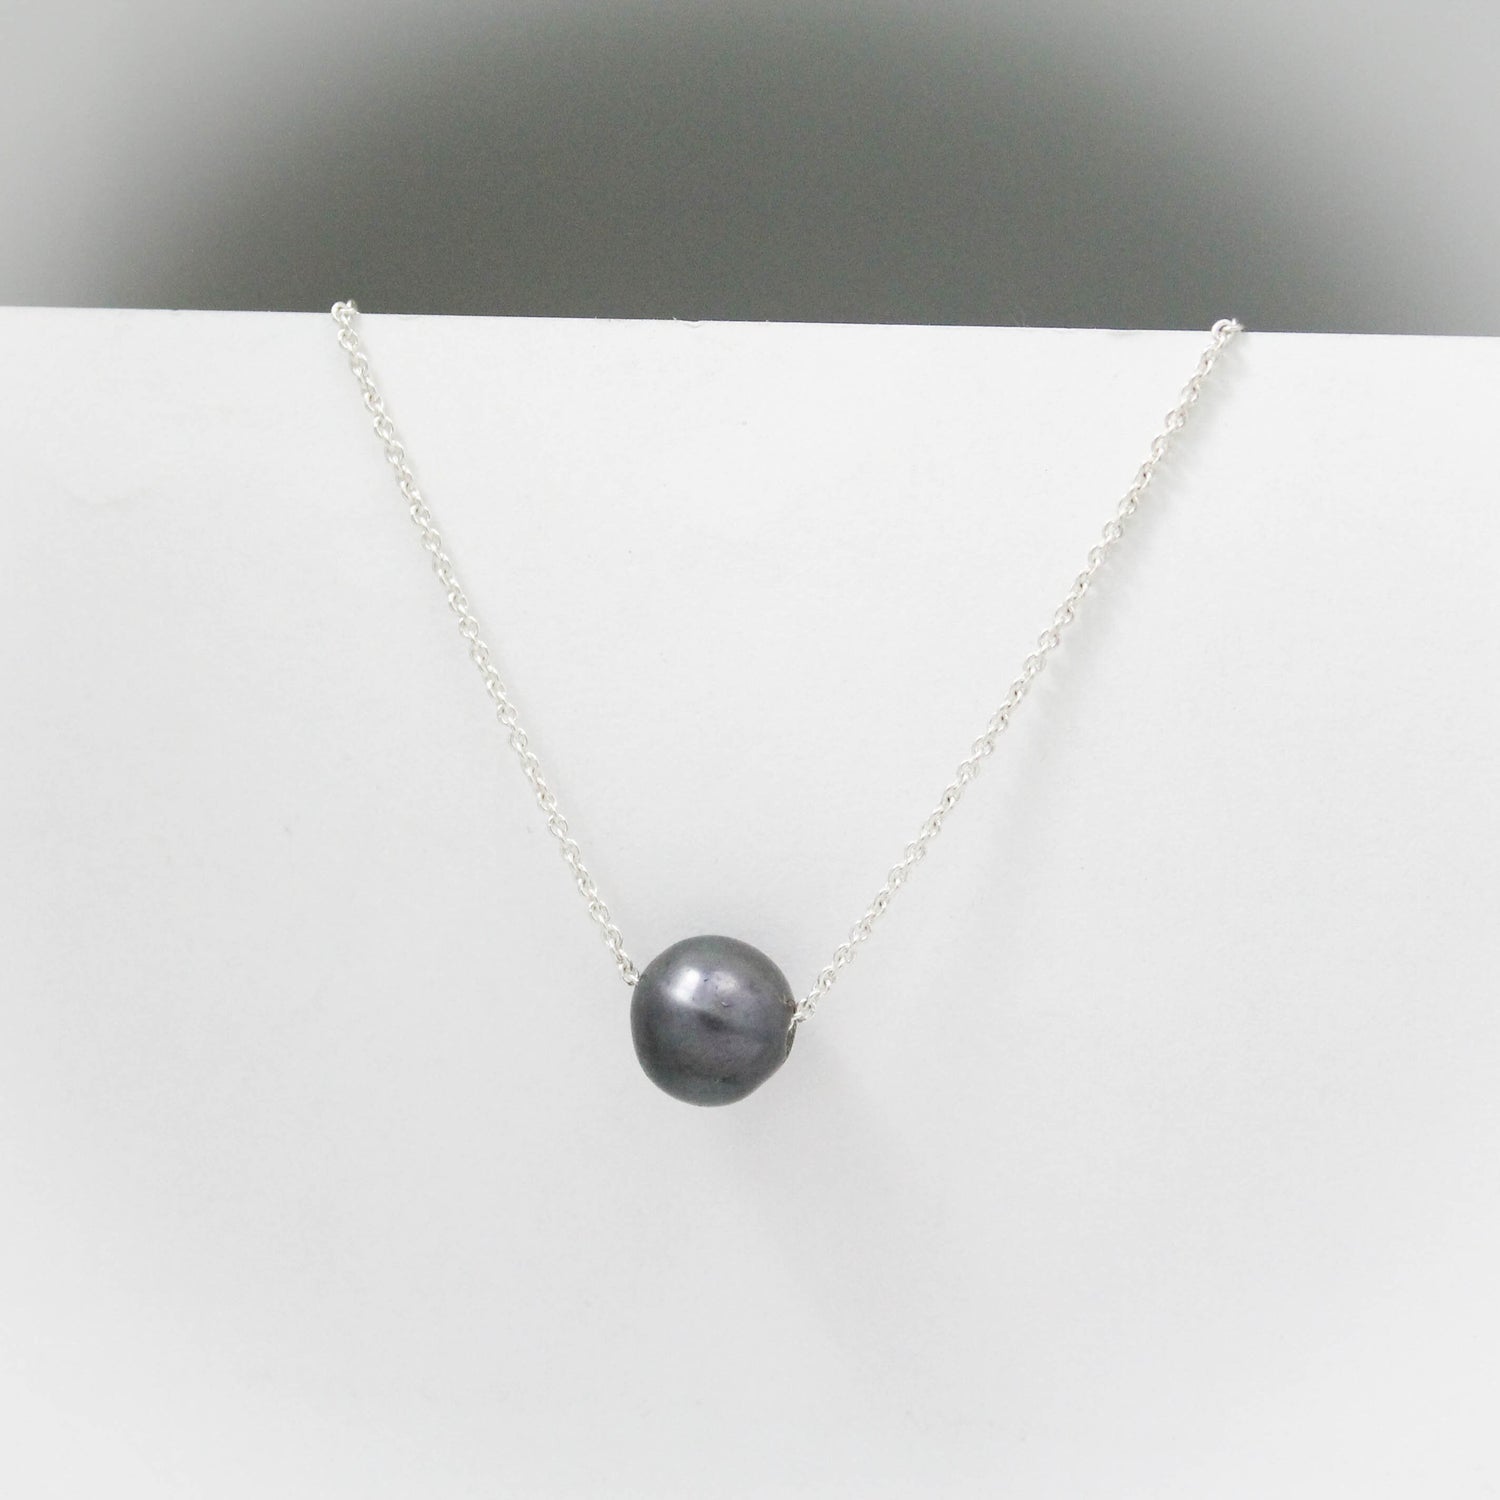 Floating Pearl Necklace, Sterling Silver Pearl Necklace, Minimalist Bridal Necklace, Single Pearl, Suspended Pearl Wedding Necklace